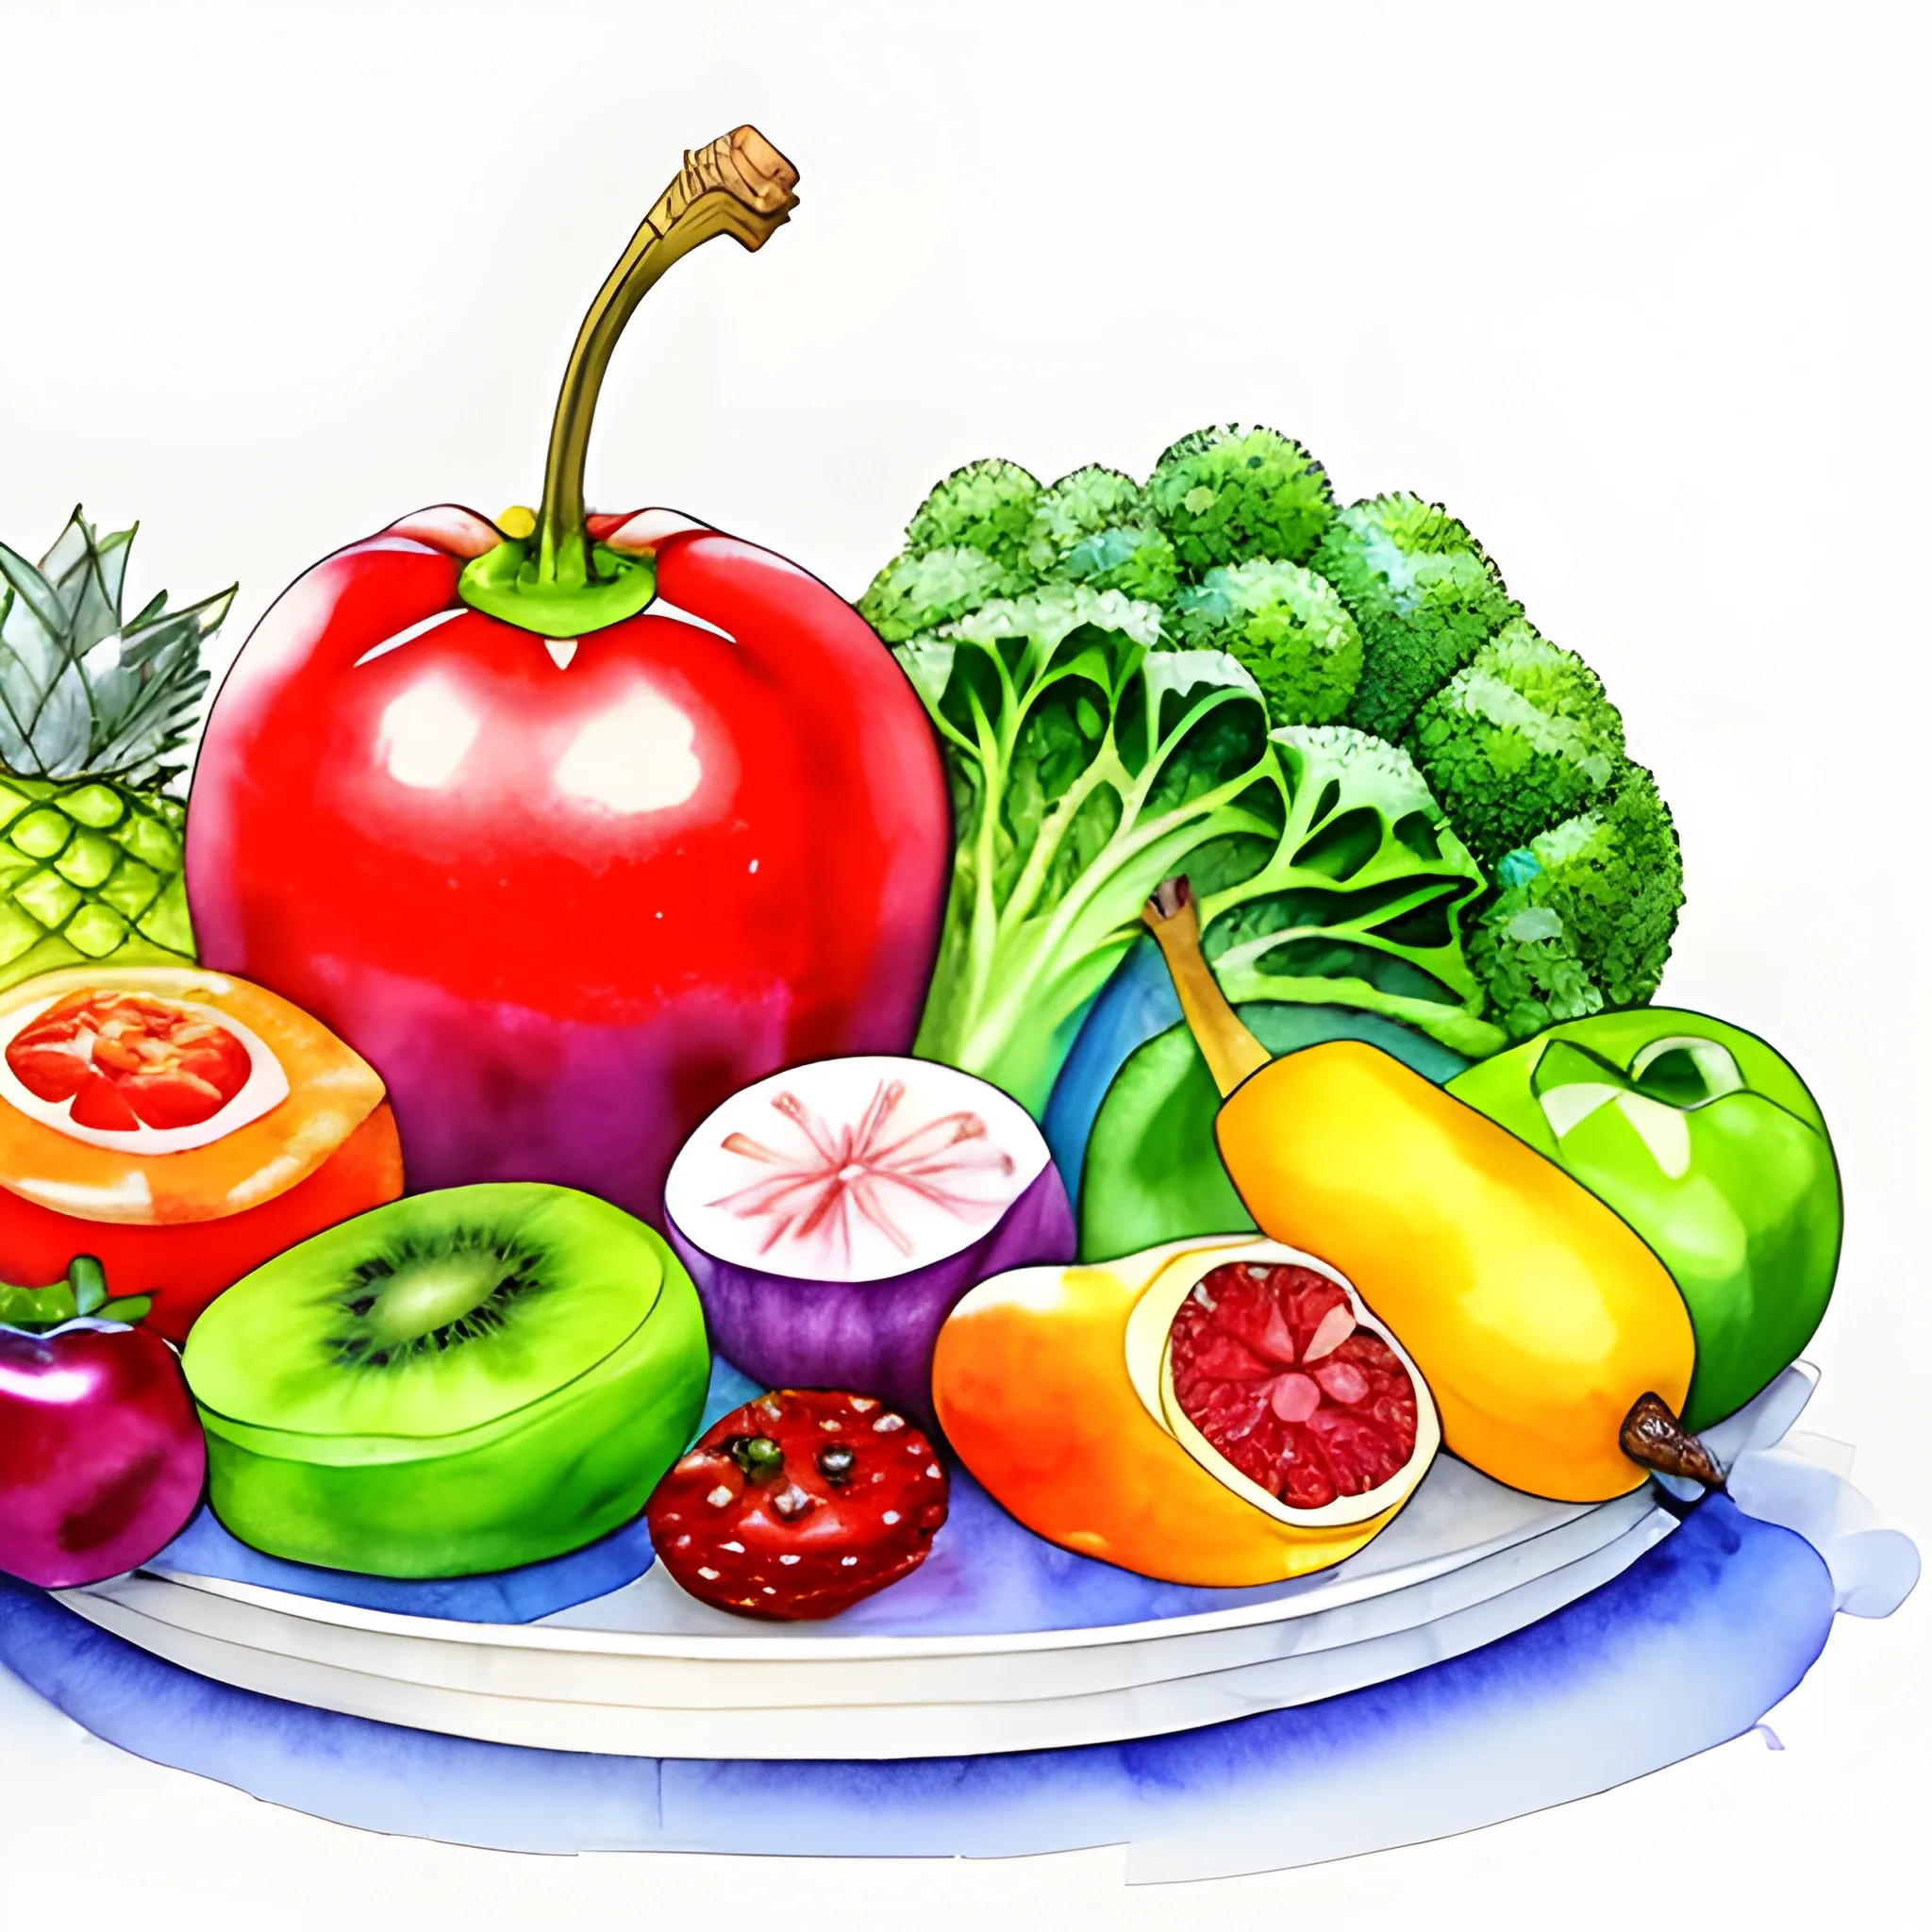 Assortment of fresh ripe fruits and vegetables on the table
, Water Color